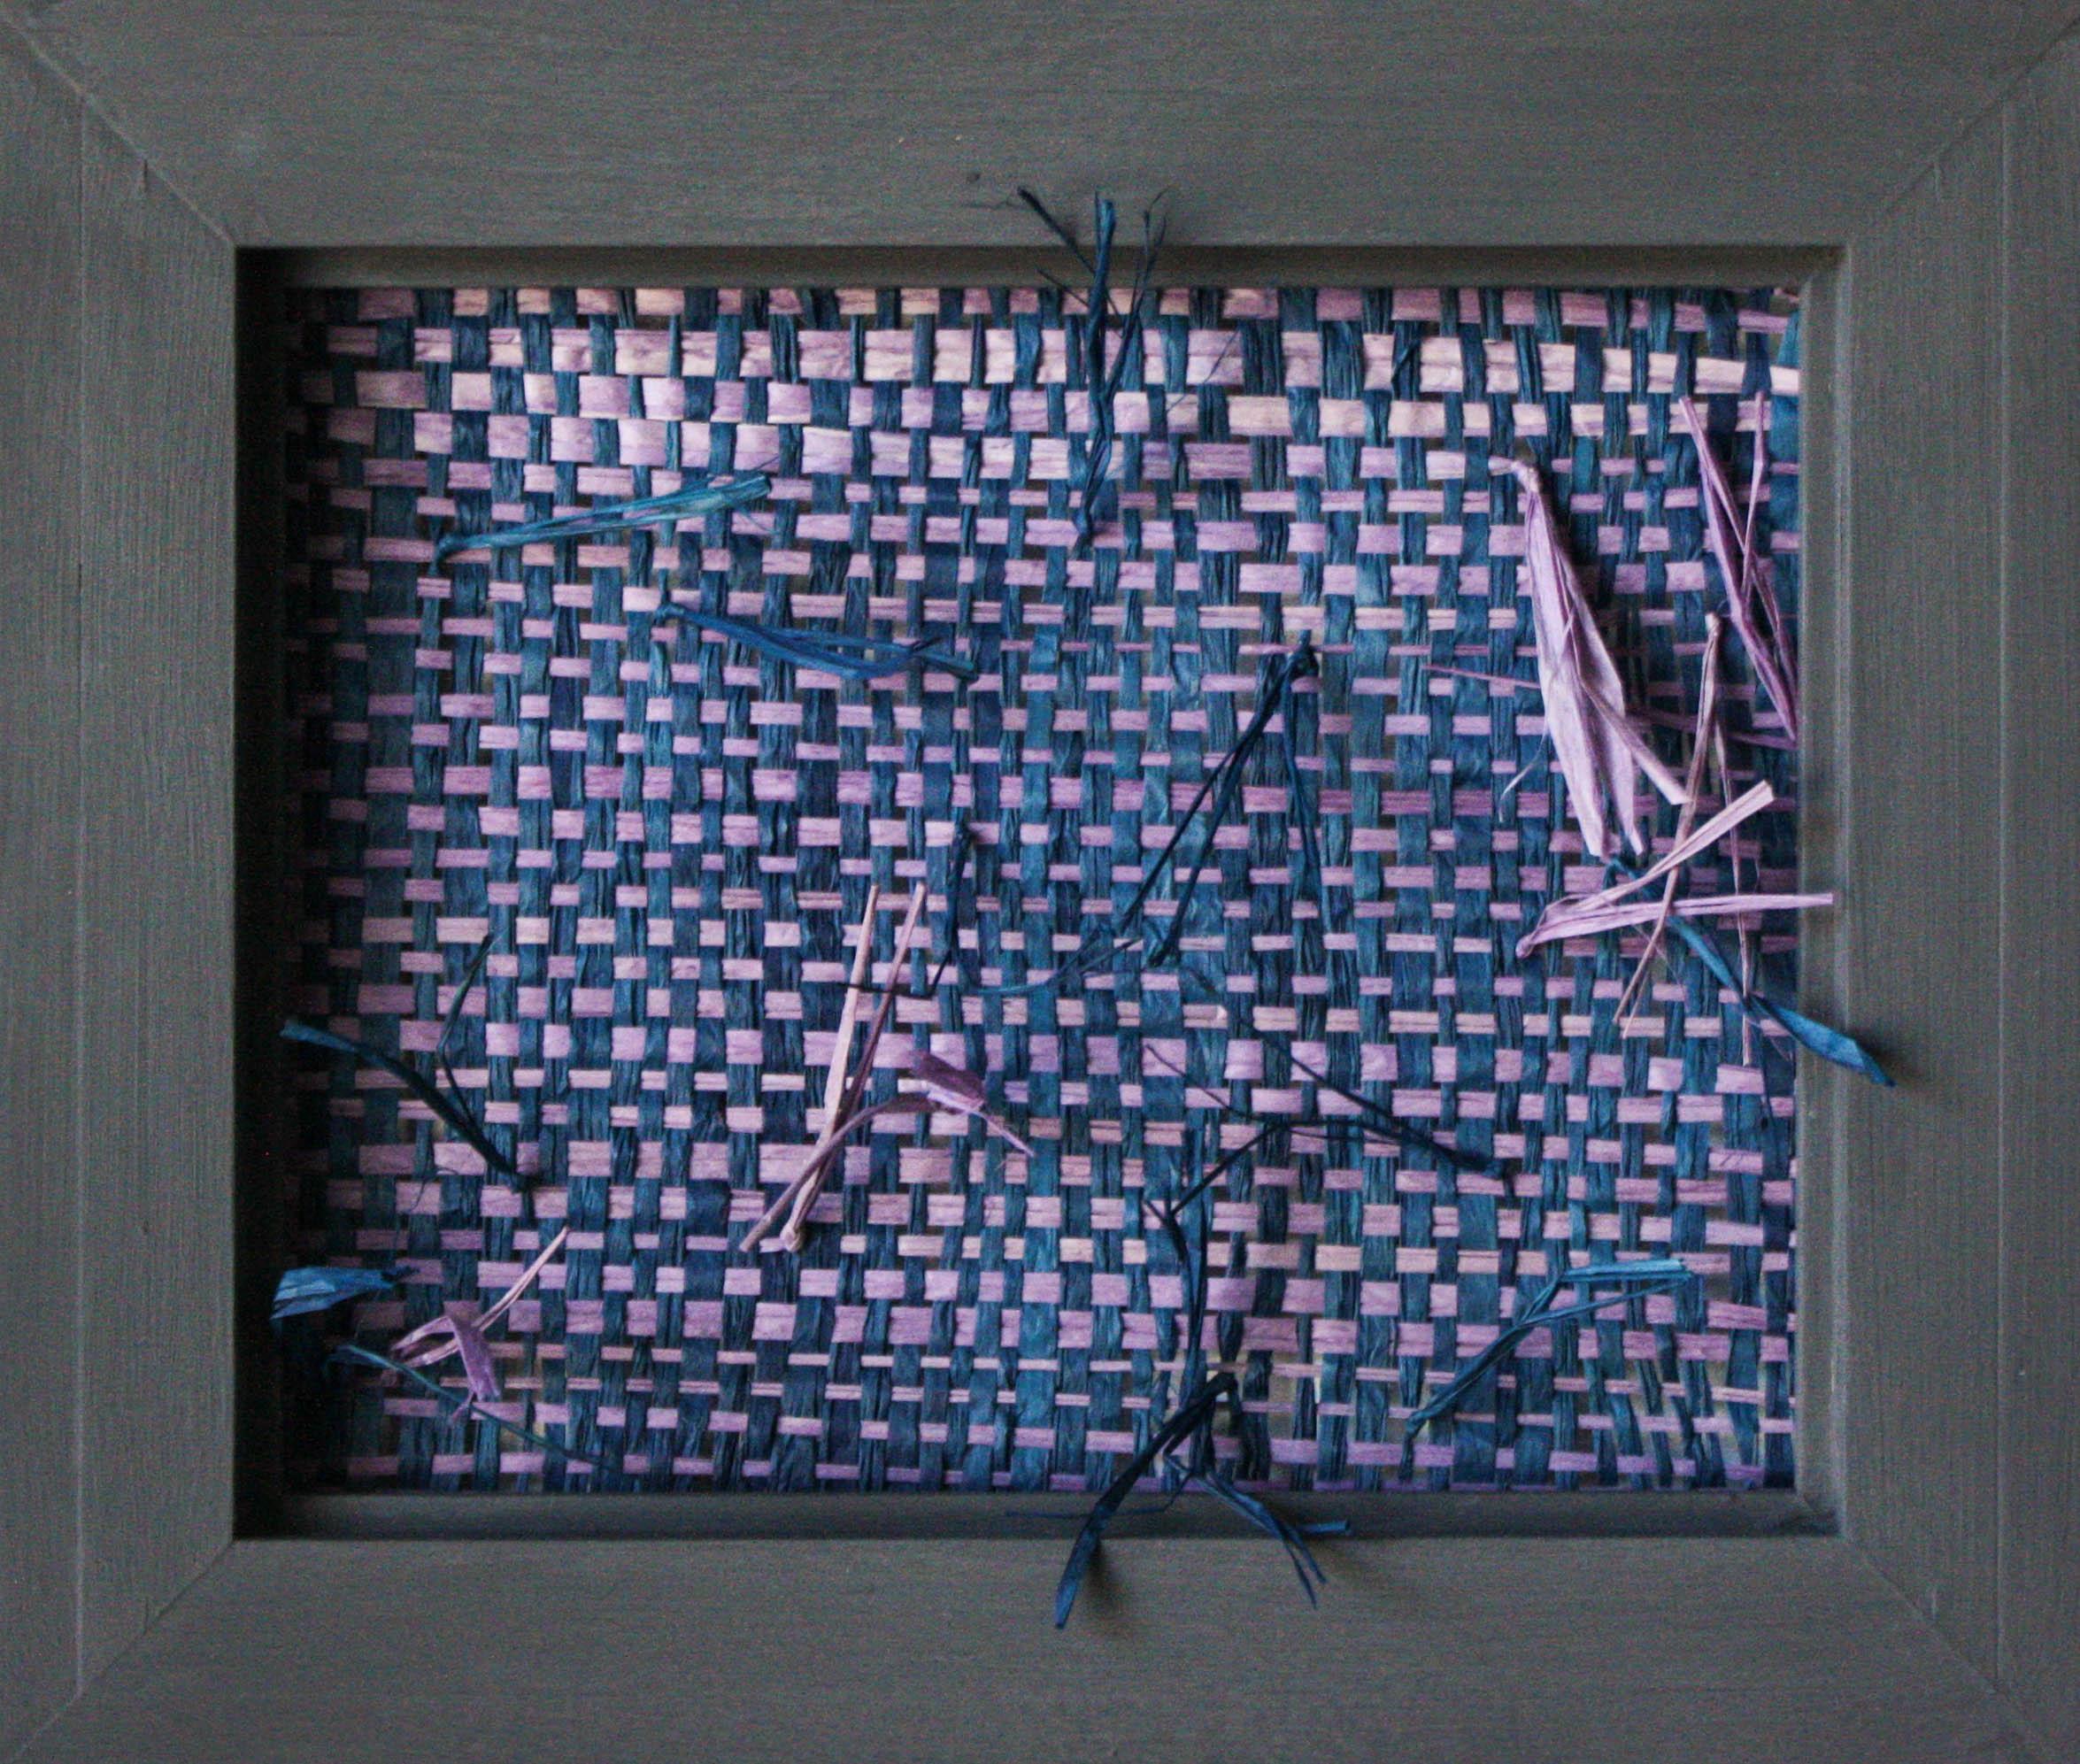 This woven sculptural wall hanging is created using blue and purple/violet raffia mounted inside a wooden frame. Its organic nature is complemented by a few loose pieces that break out of the rectangular scope of the frame.